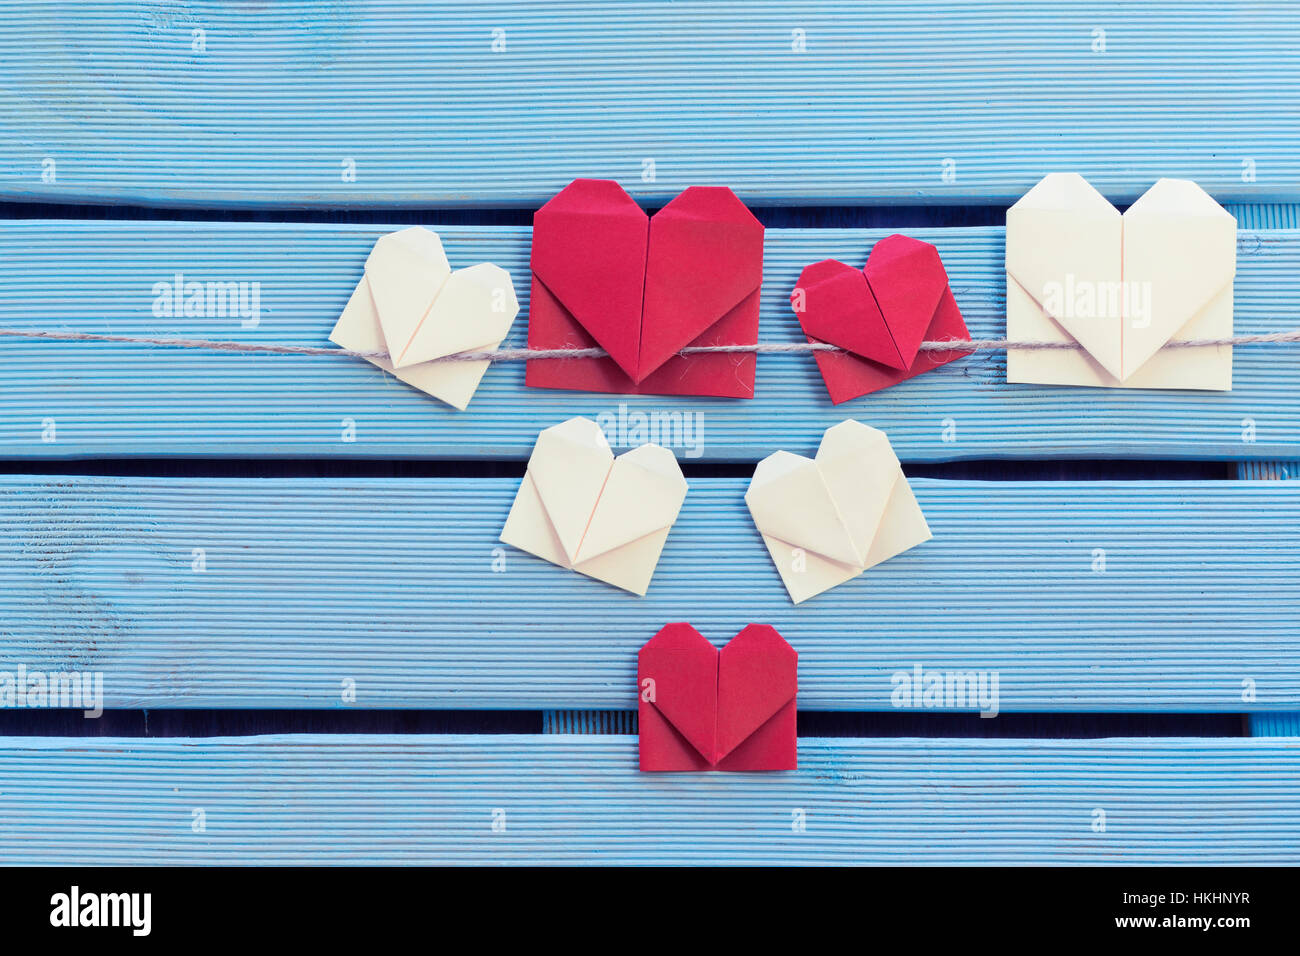 Origami hearts bookmark hanging on blue wooden background. Subject captured against soft window lighting on a blue wooden background. Copy Space. Stock Photo